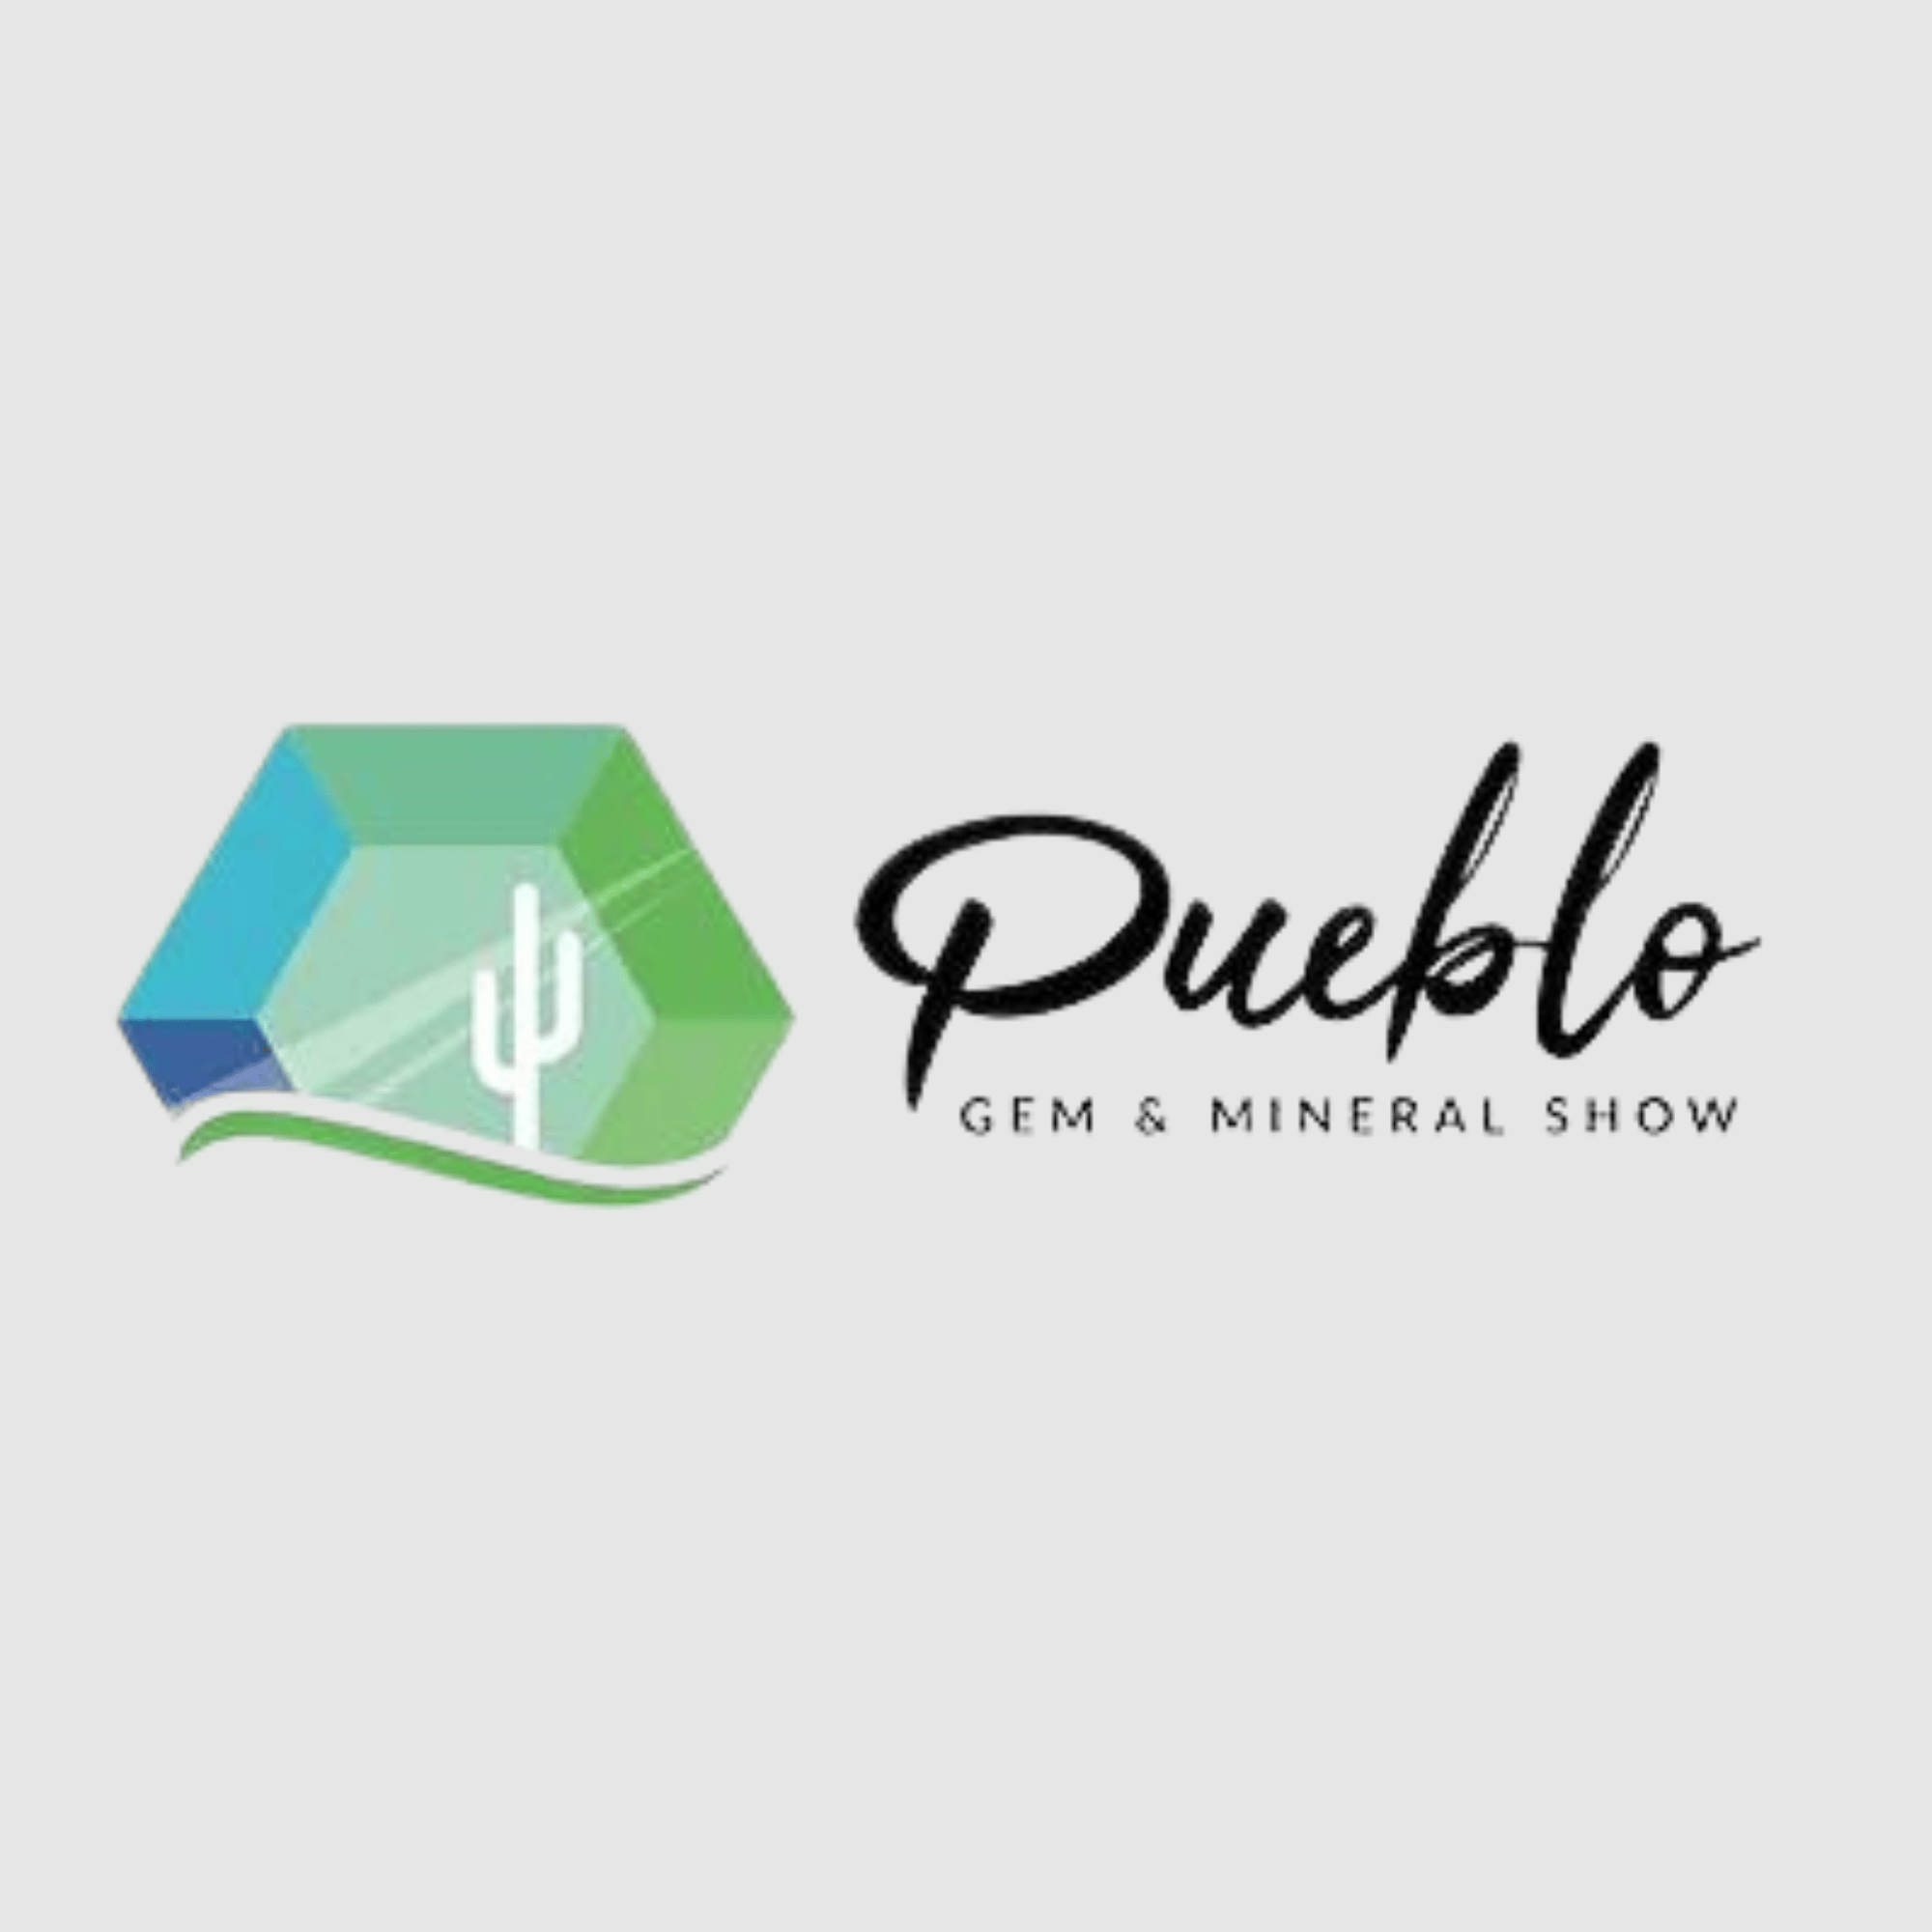 The Pueblo Gem & Mineral Show has over 40 years of history, and it is one of the famous shows in the Tucson show.